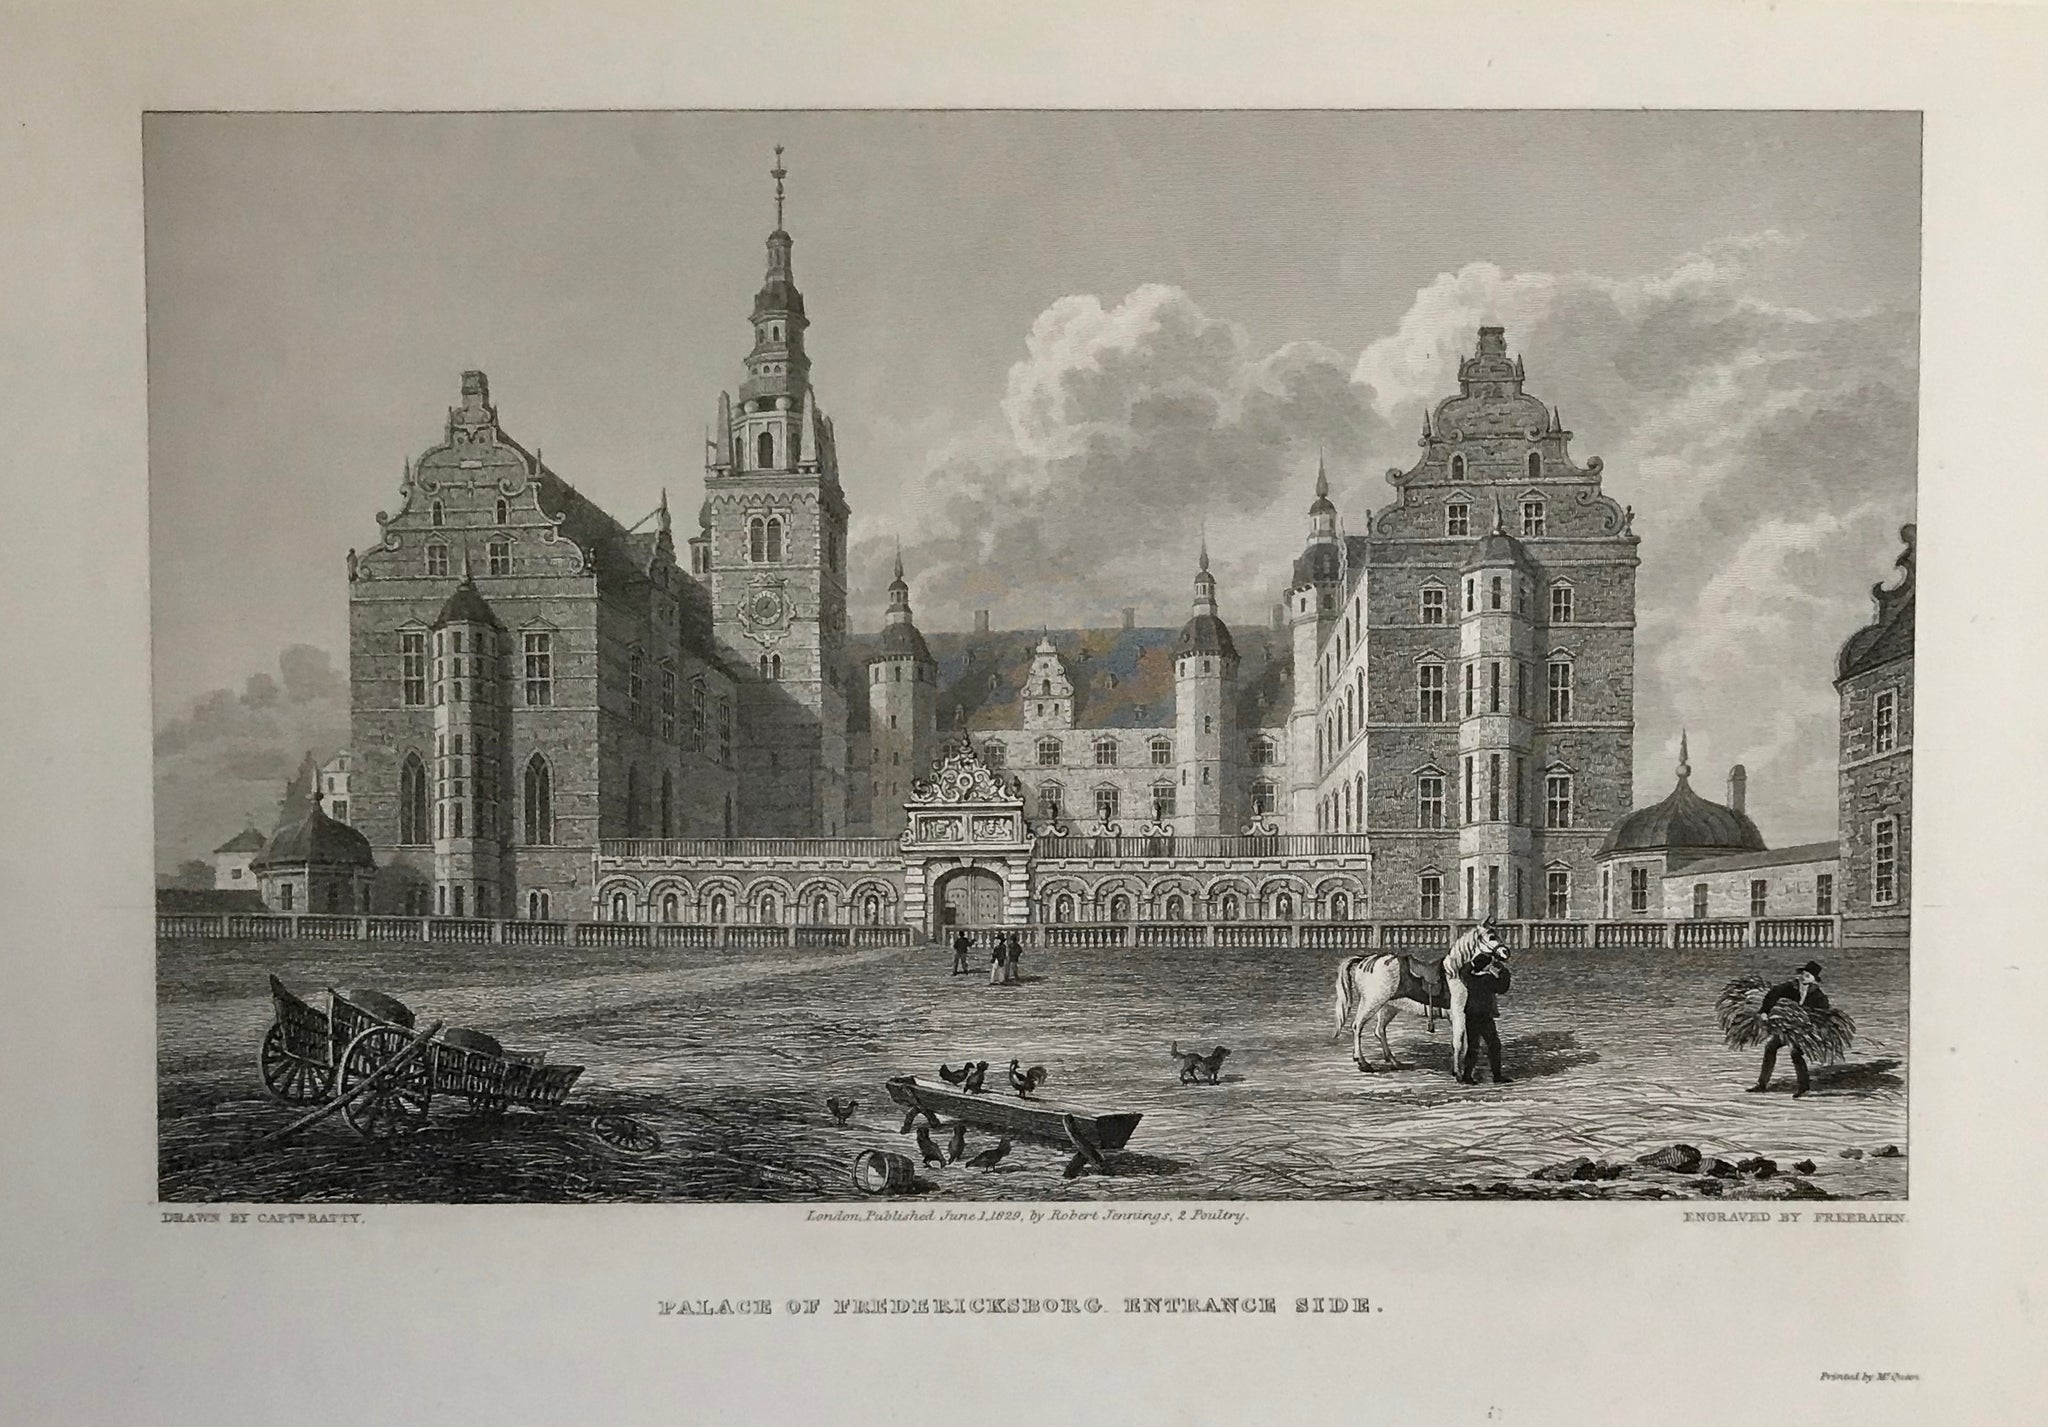 "Palace of Fredericksborg Entrance Side"  Steel etching by Freebairn after a drawing by Batty. London, 1828.